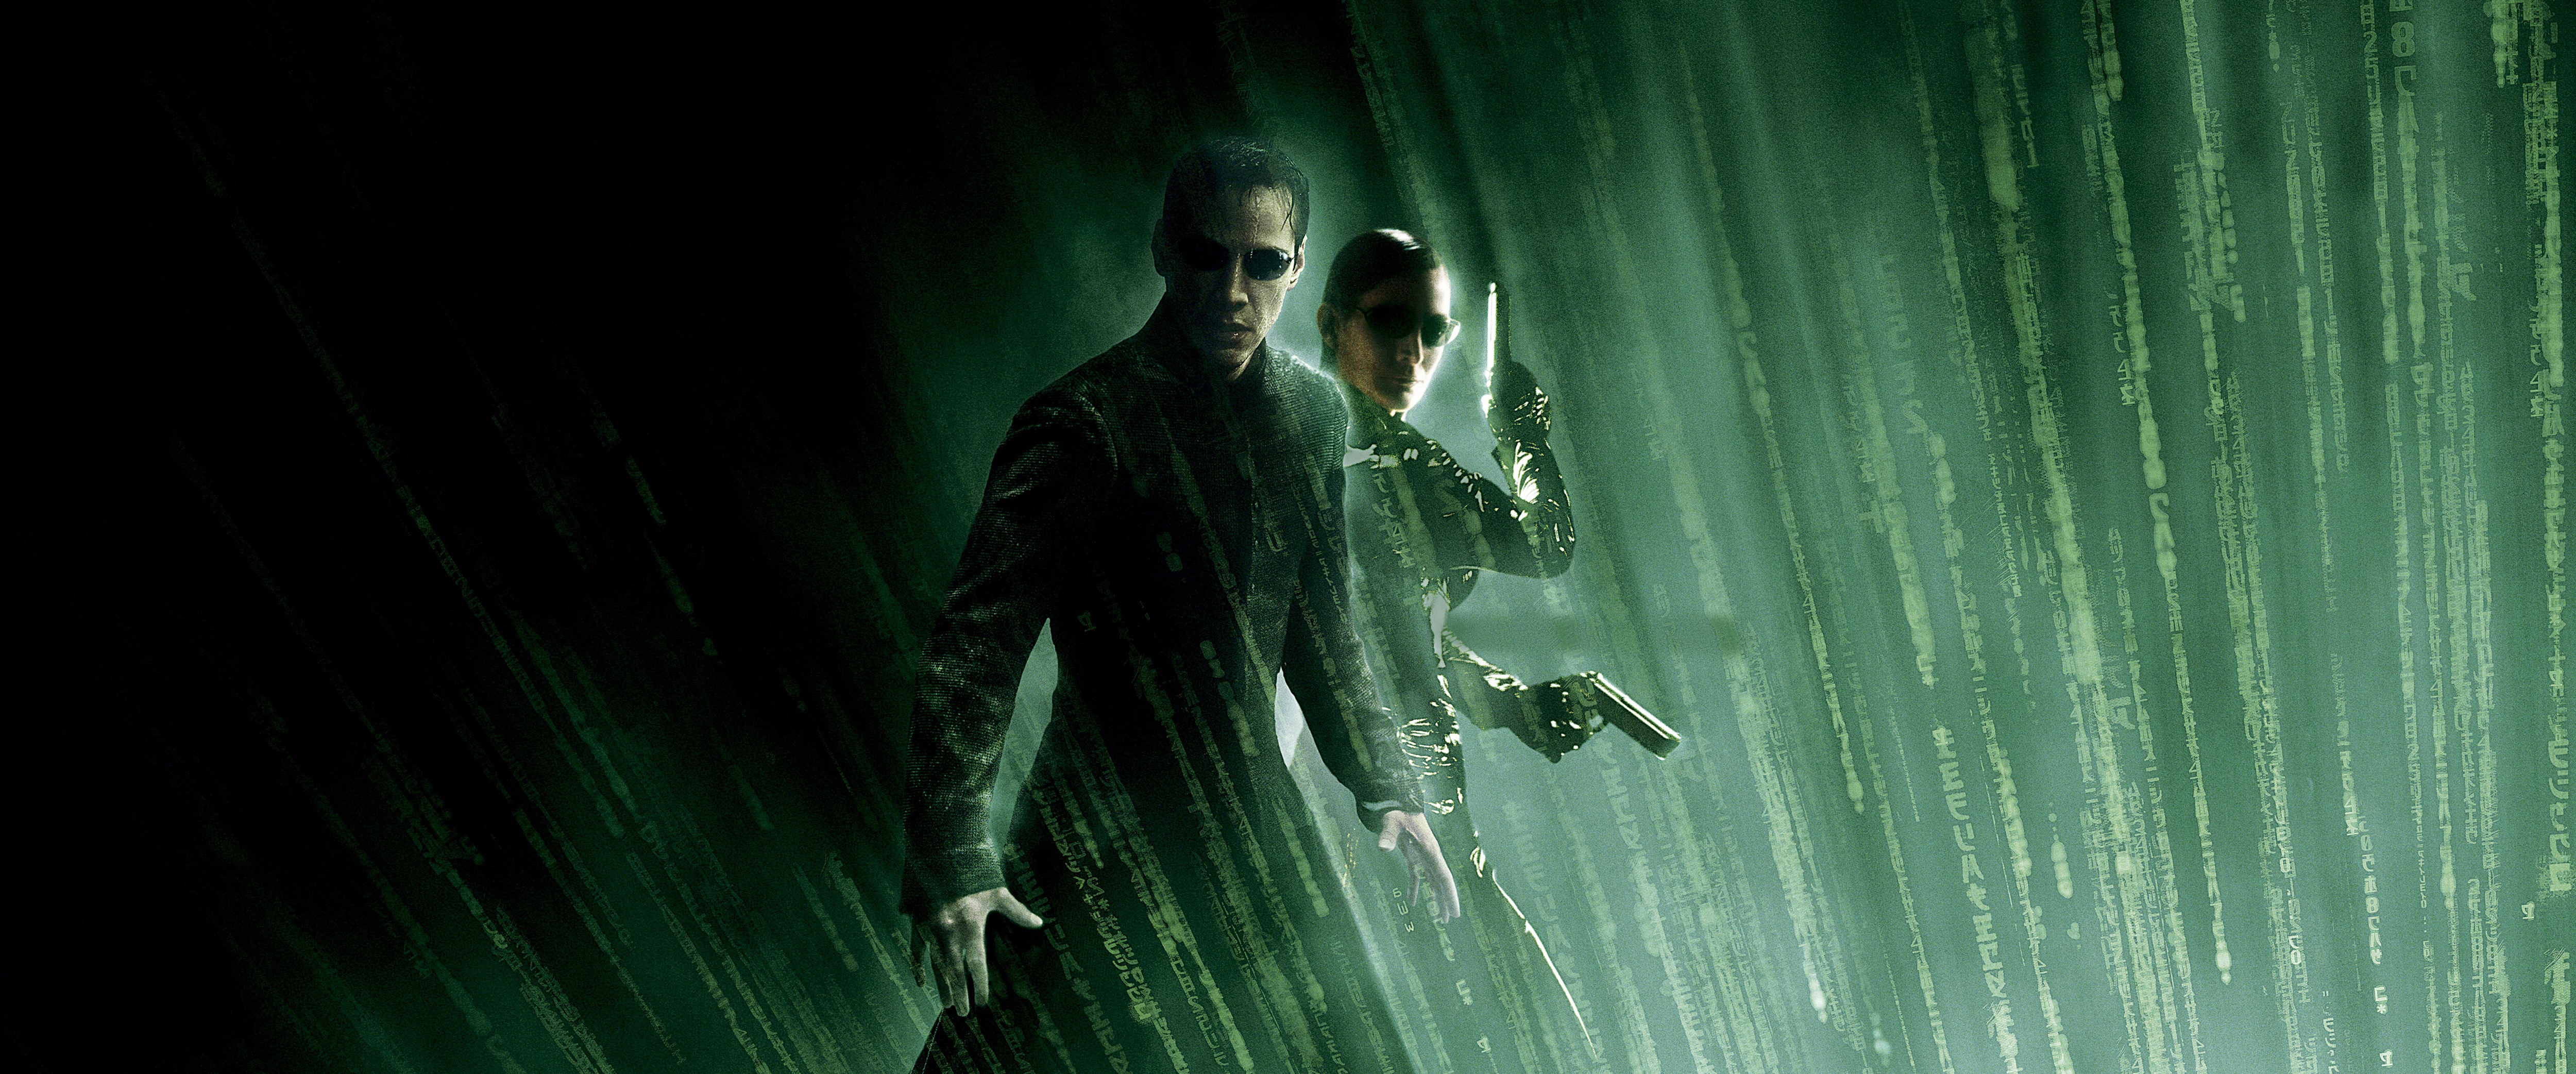 the matrix reloaded, movie, carrie anne moss, keanu reeves, the matrix